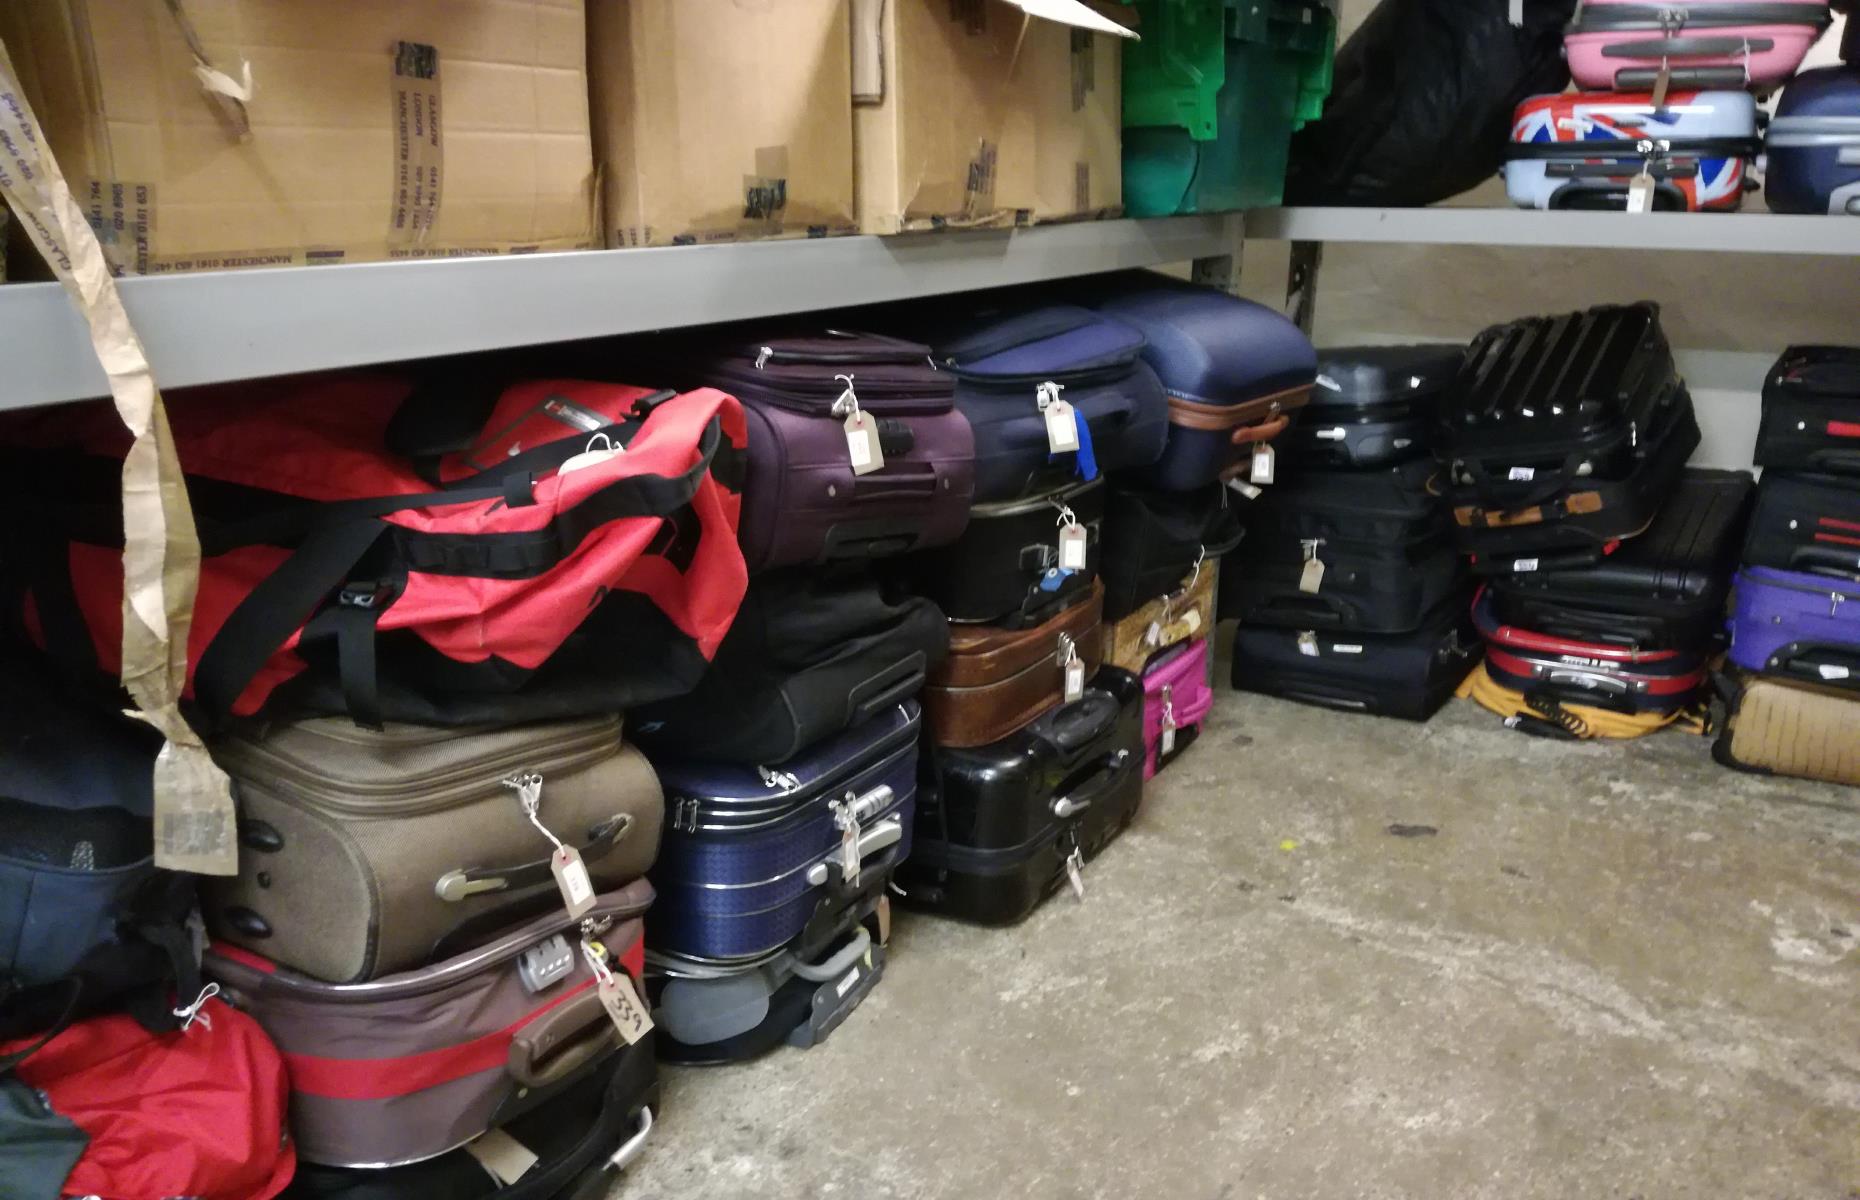 Could you find a bargain in lost luggage? We visit Heathrow suitcase auction  | This is Money